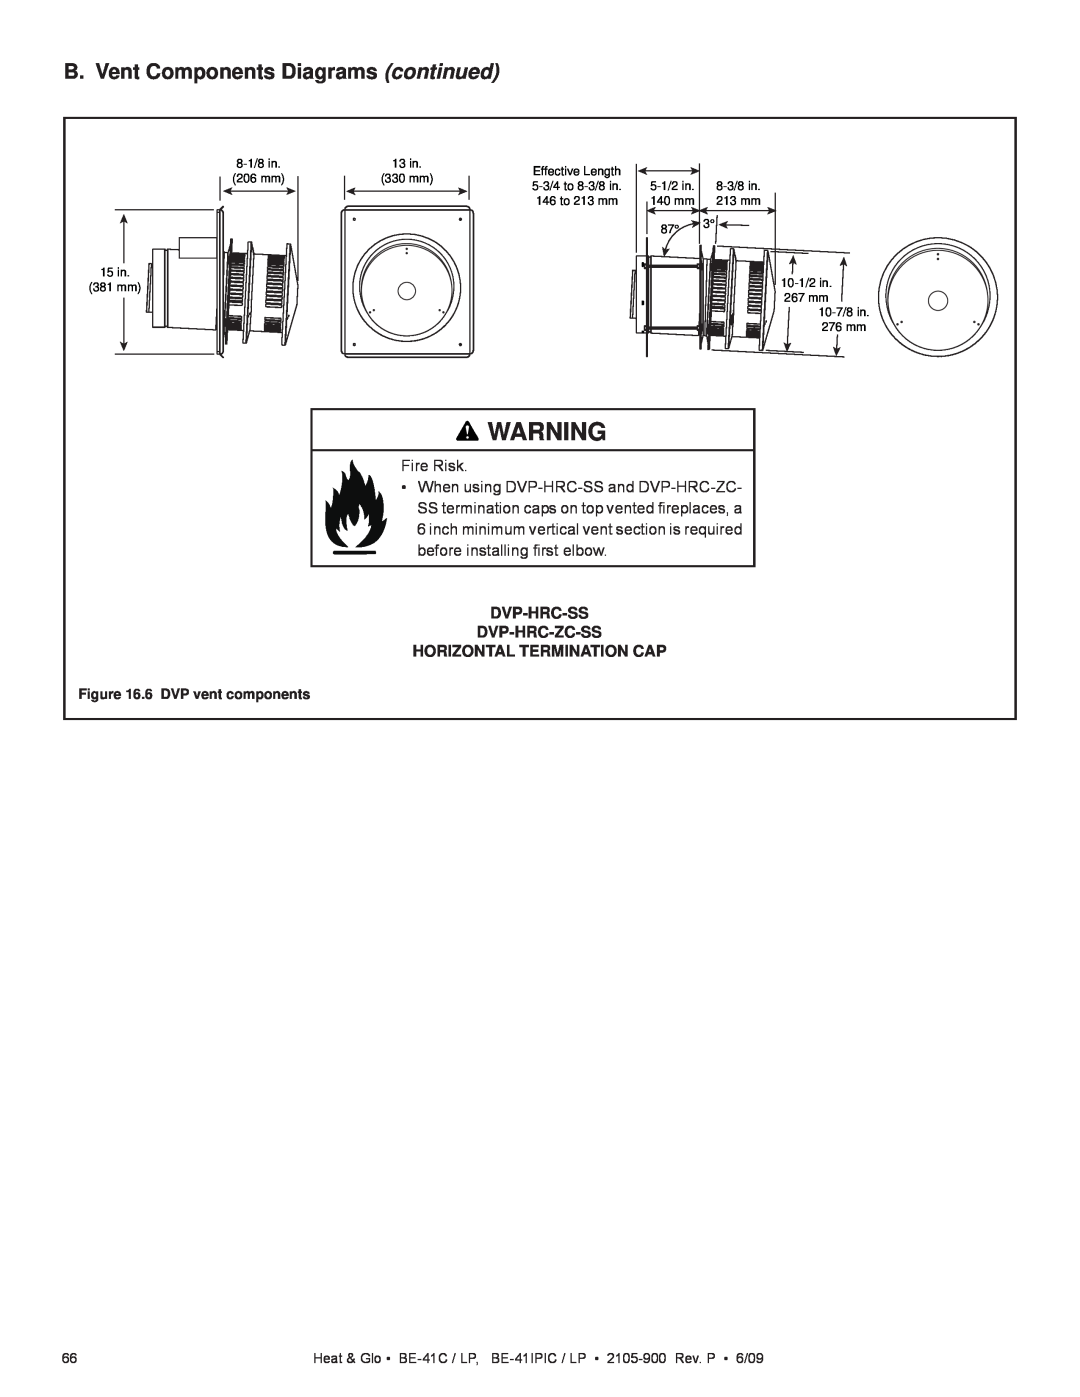 Heat & Glo LifeStyle BE-41LPC, BE-41C, BE-41IPIC B. Vent Components Diagrams continued, Fire Risk, Dvp-Hrc-Ss Dvp-Hrc-Zc-Ss 